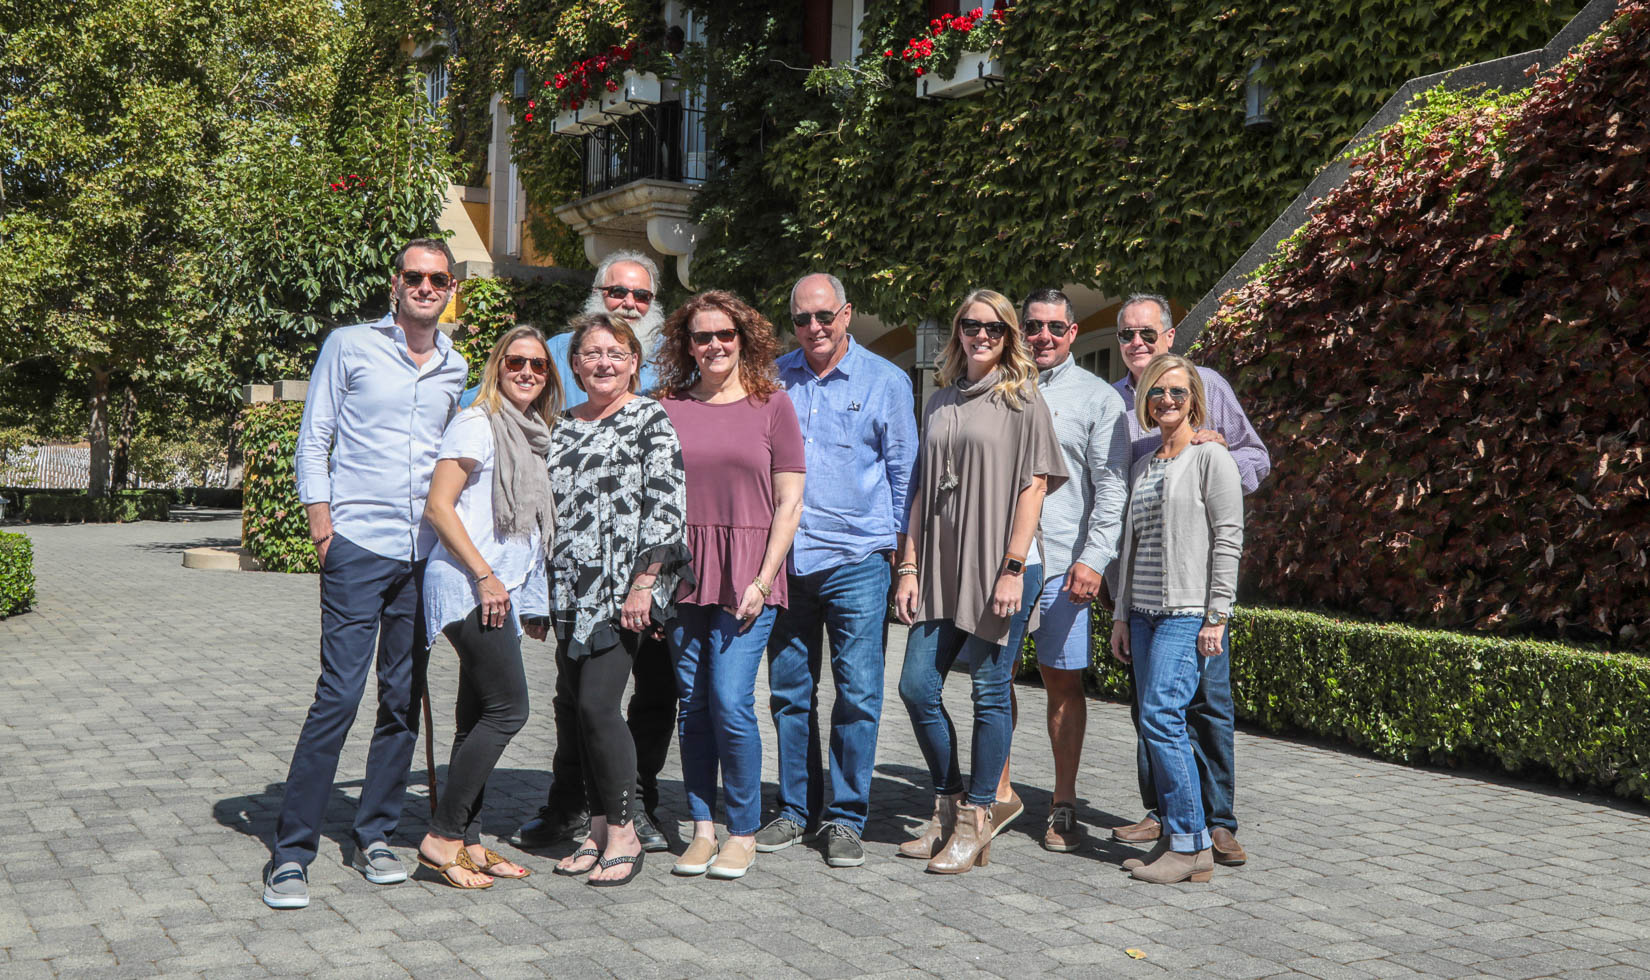 A group of guests at Jordan Winery in wine country casual attire. Most are wearing sunglasses, nice jeans, button down shirts, and/or flowy blouses.